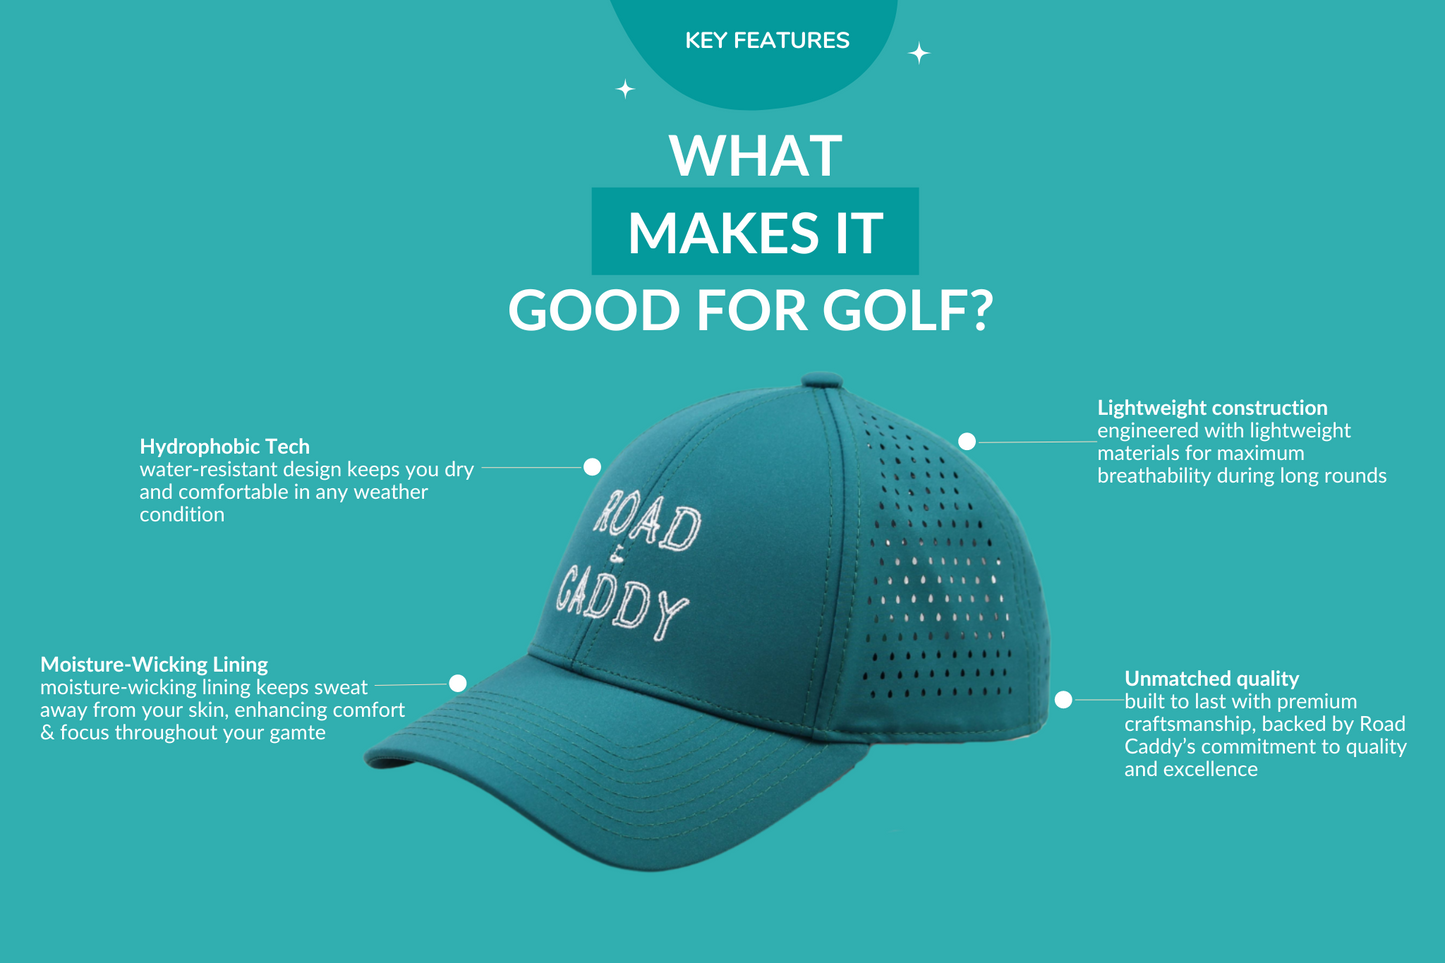 Road Caddy Sweat Resistant Uni-Sex Performance Hydro Golf Hat One Size Fits All - Unrivaled Comfort and Style